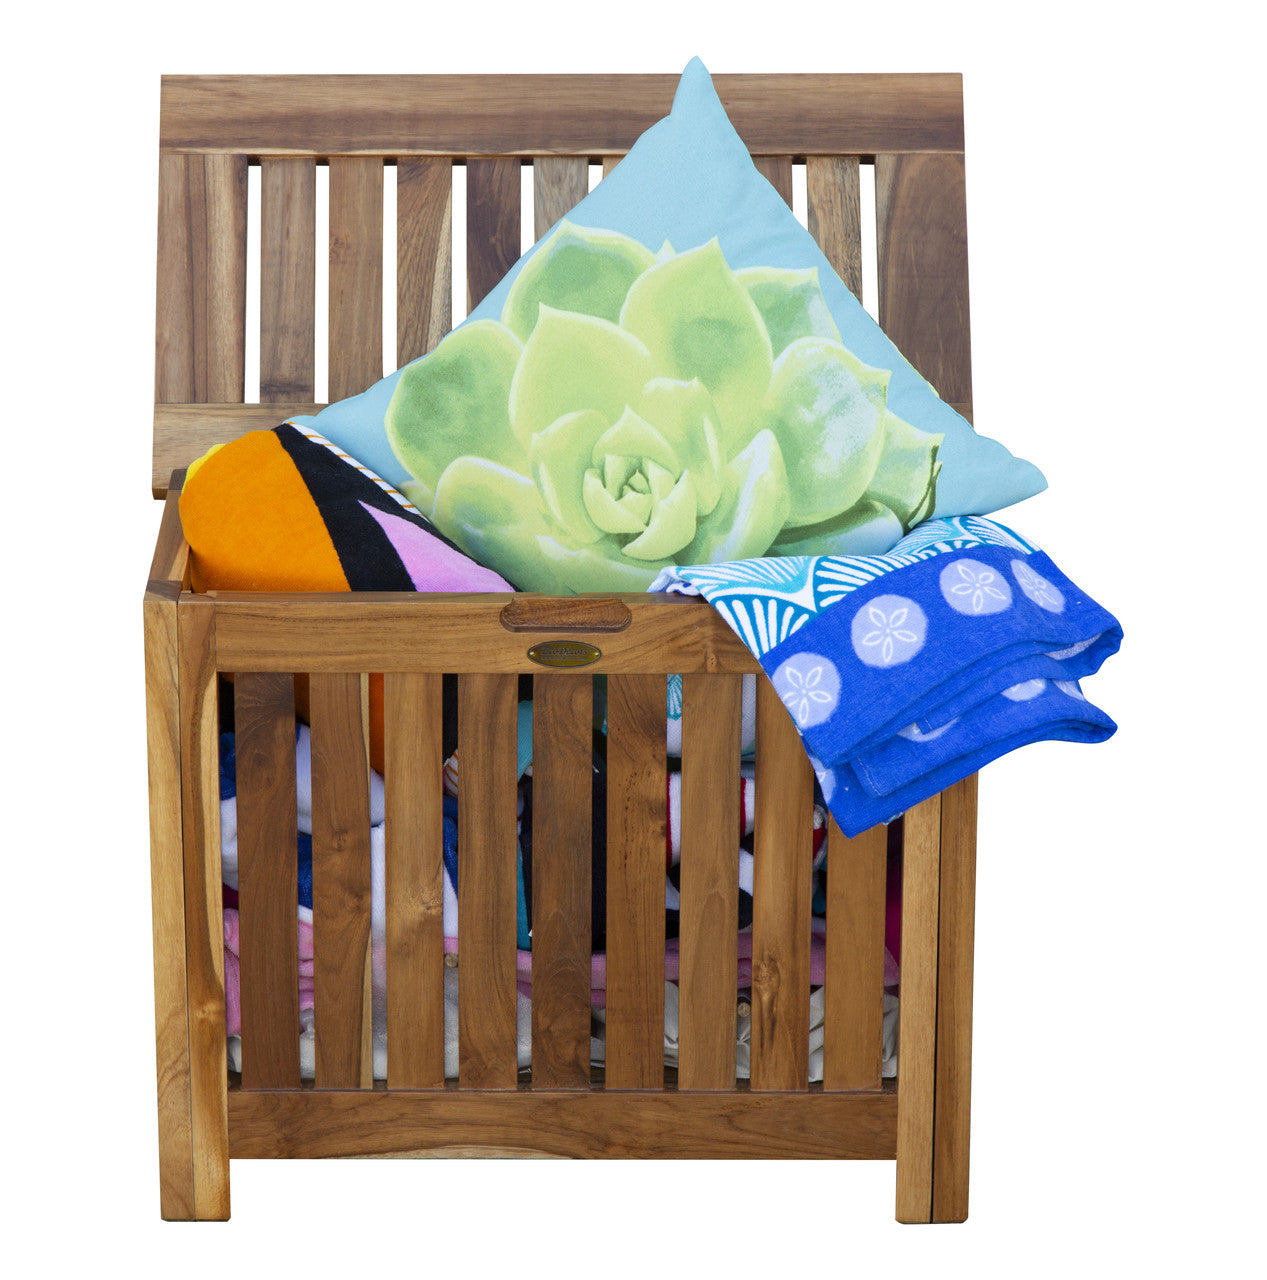 EcoDecors Solid Teak Apartment Hamper with Laundry Bag